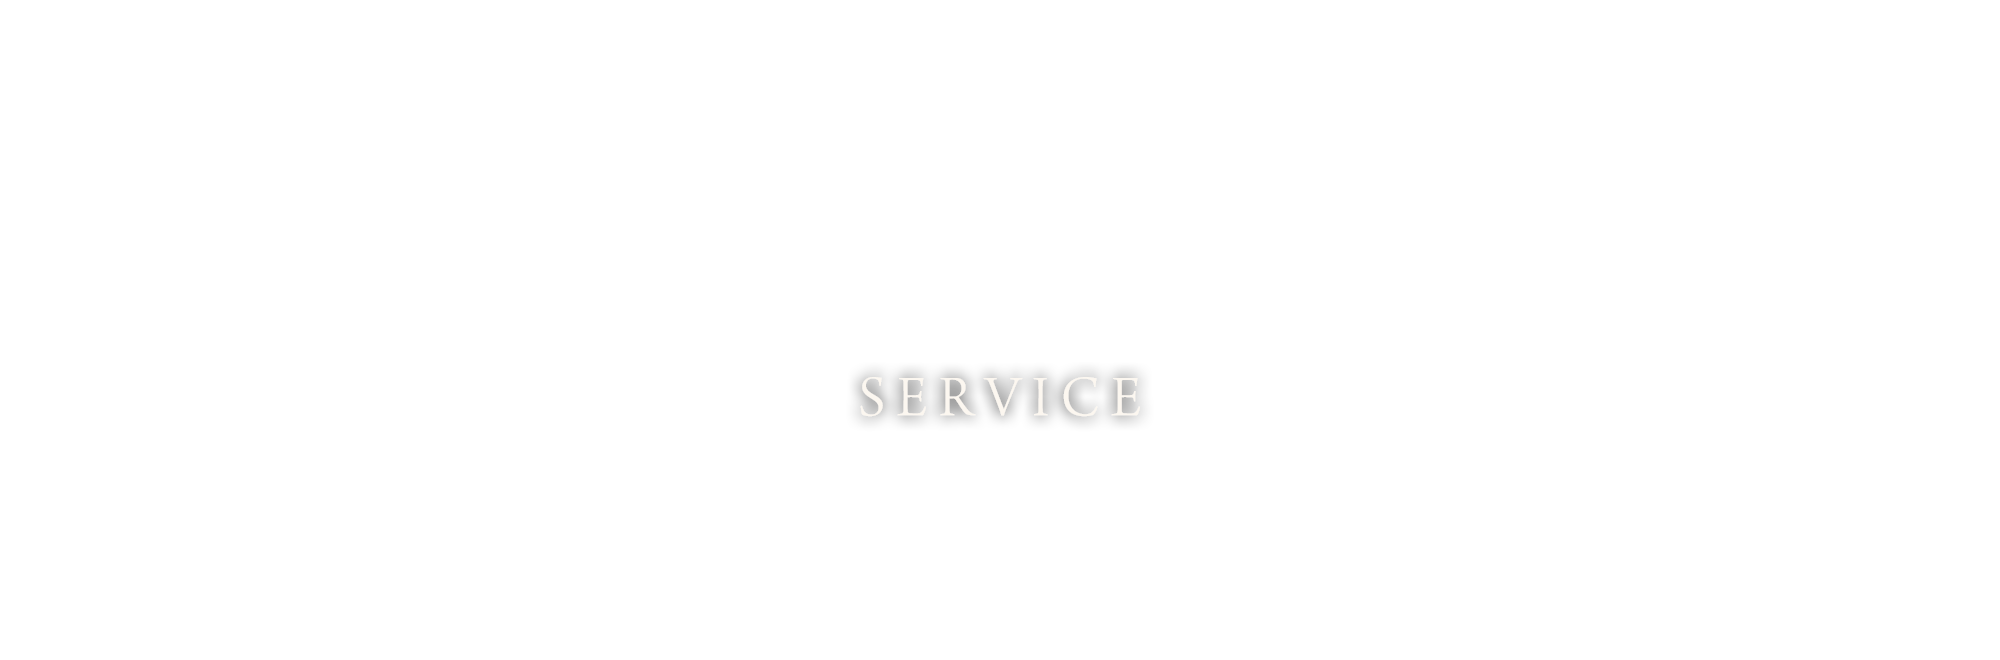 Time’s One SERVICE